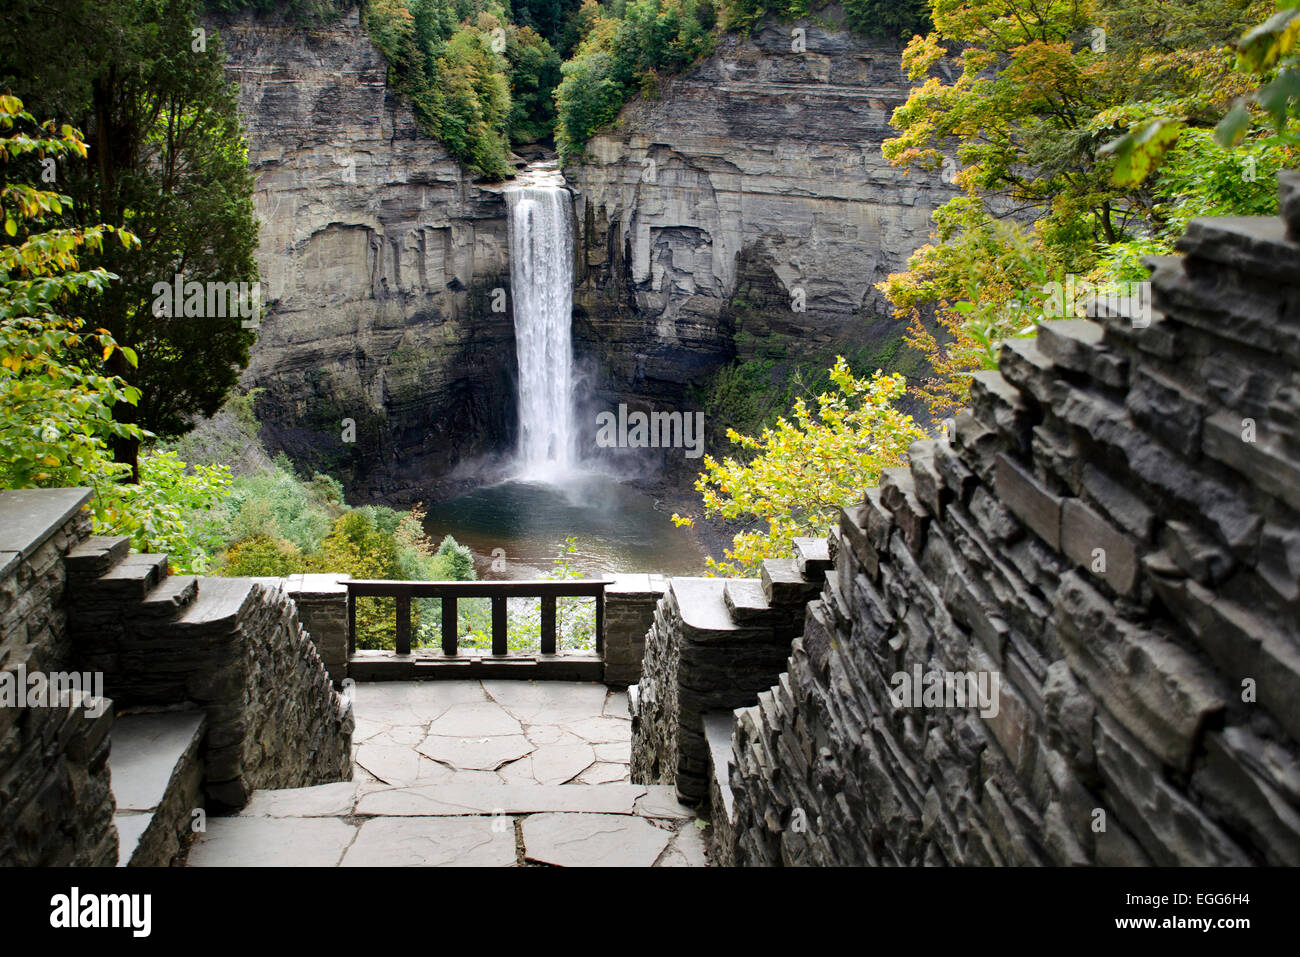 Taughannock Falls New York State Park, Ithaca Finger Lakes region, Tompkins County Central New York, USA. Stockfoto